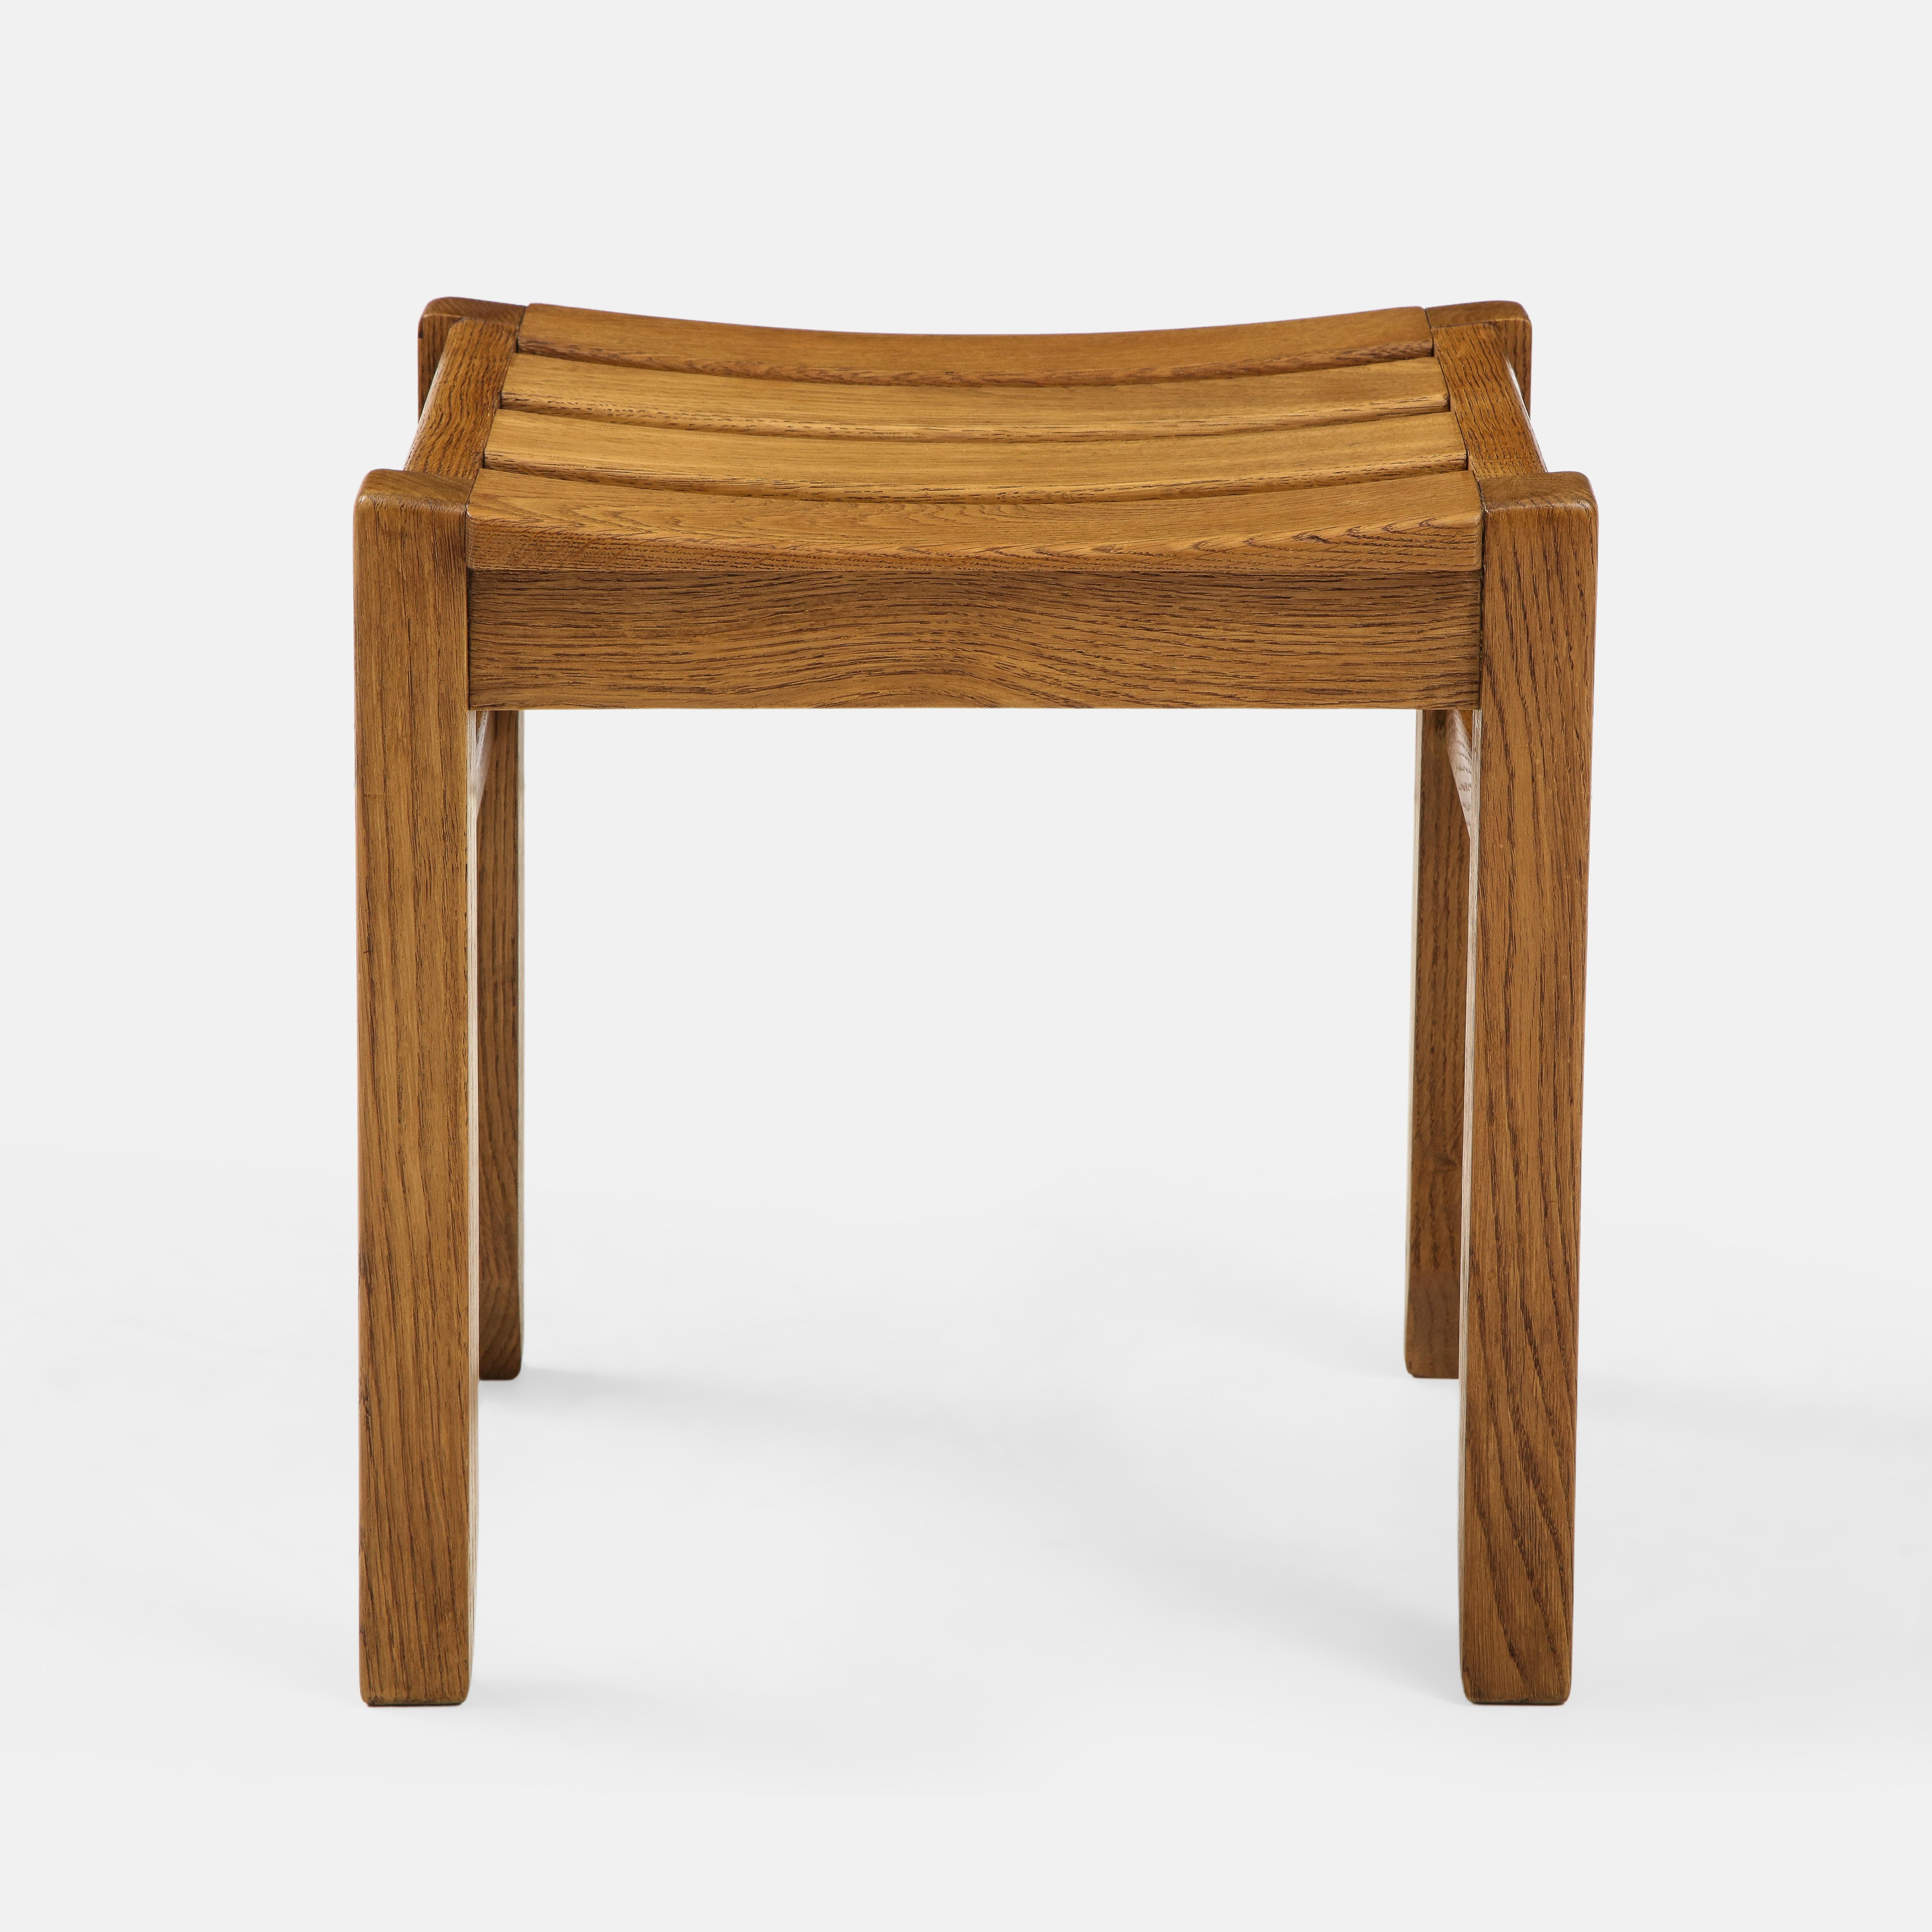 Guillerme et Chambron for Edition Votre Maison solid oak stool with elegant sculptural form, France, 1950s. The stool's composition is playfully graphic with the top composed of slightly curved slats and legs angled towards the bottom giving it an